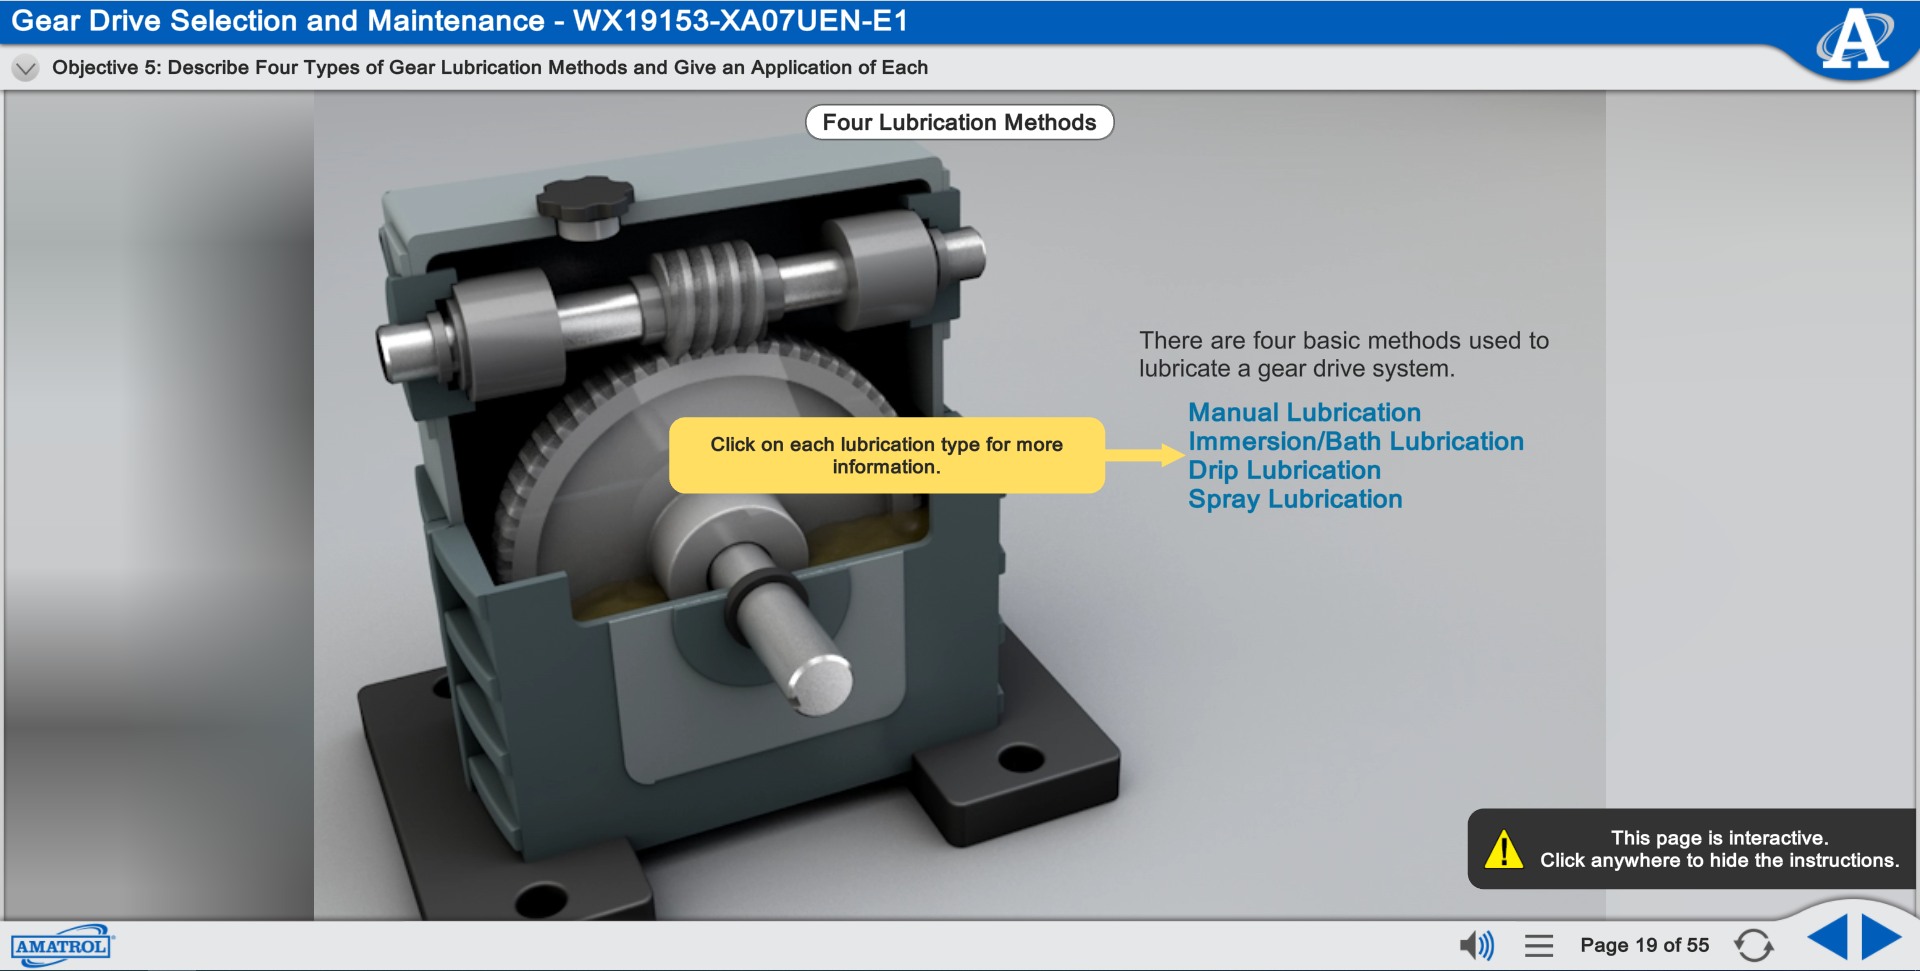 Gear Drive Selection and Maintenance Interactive eLearning